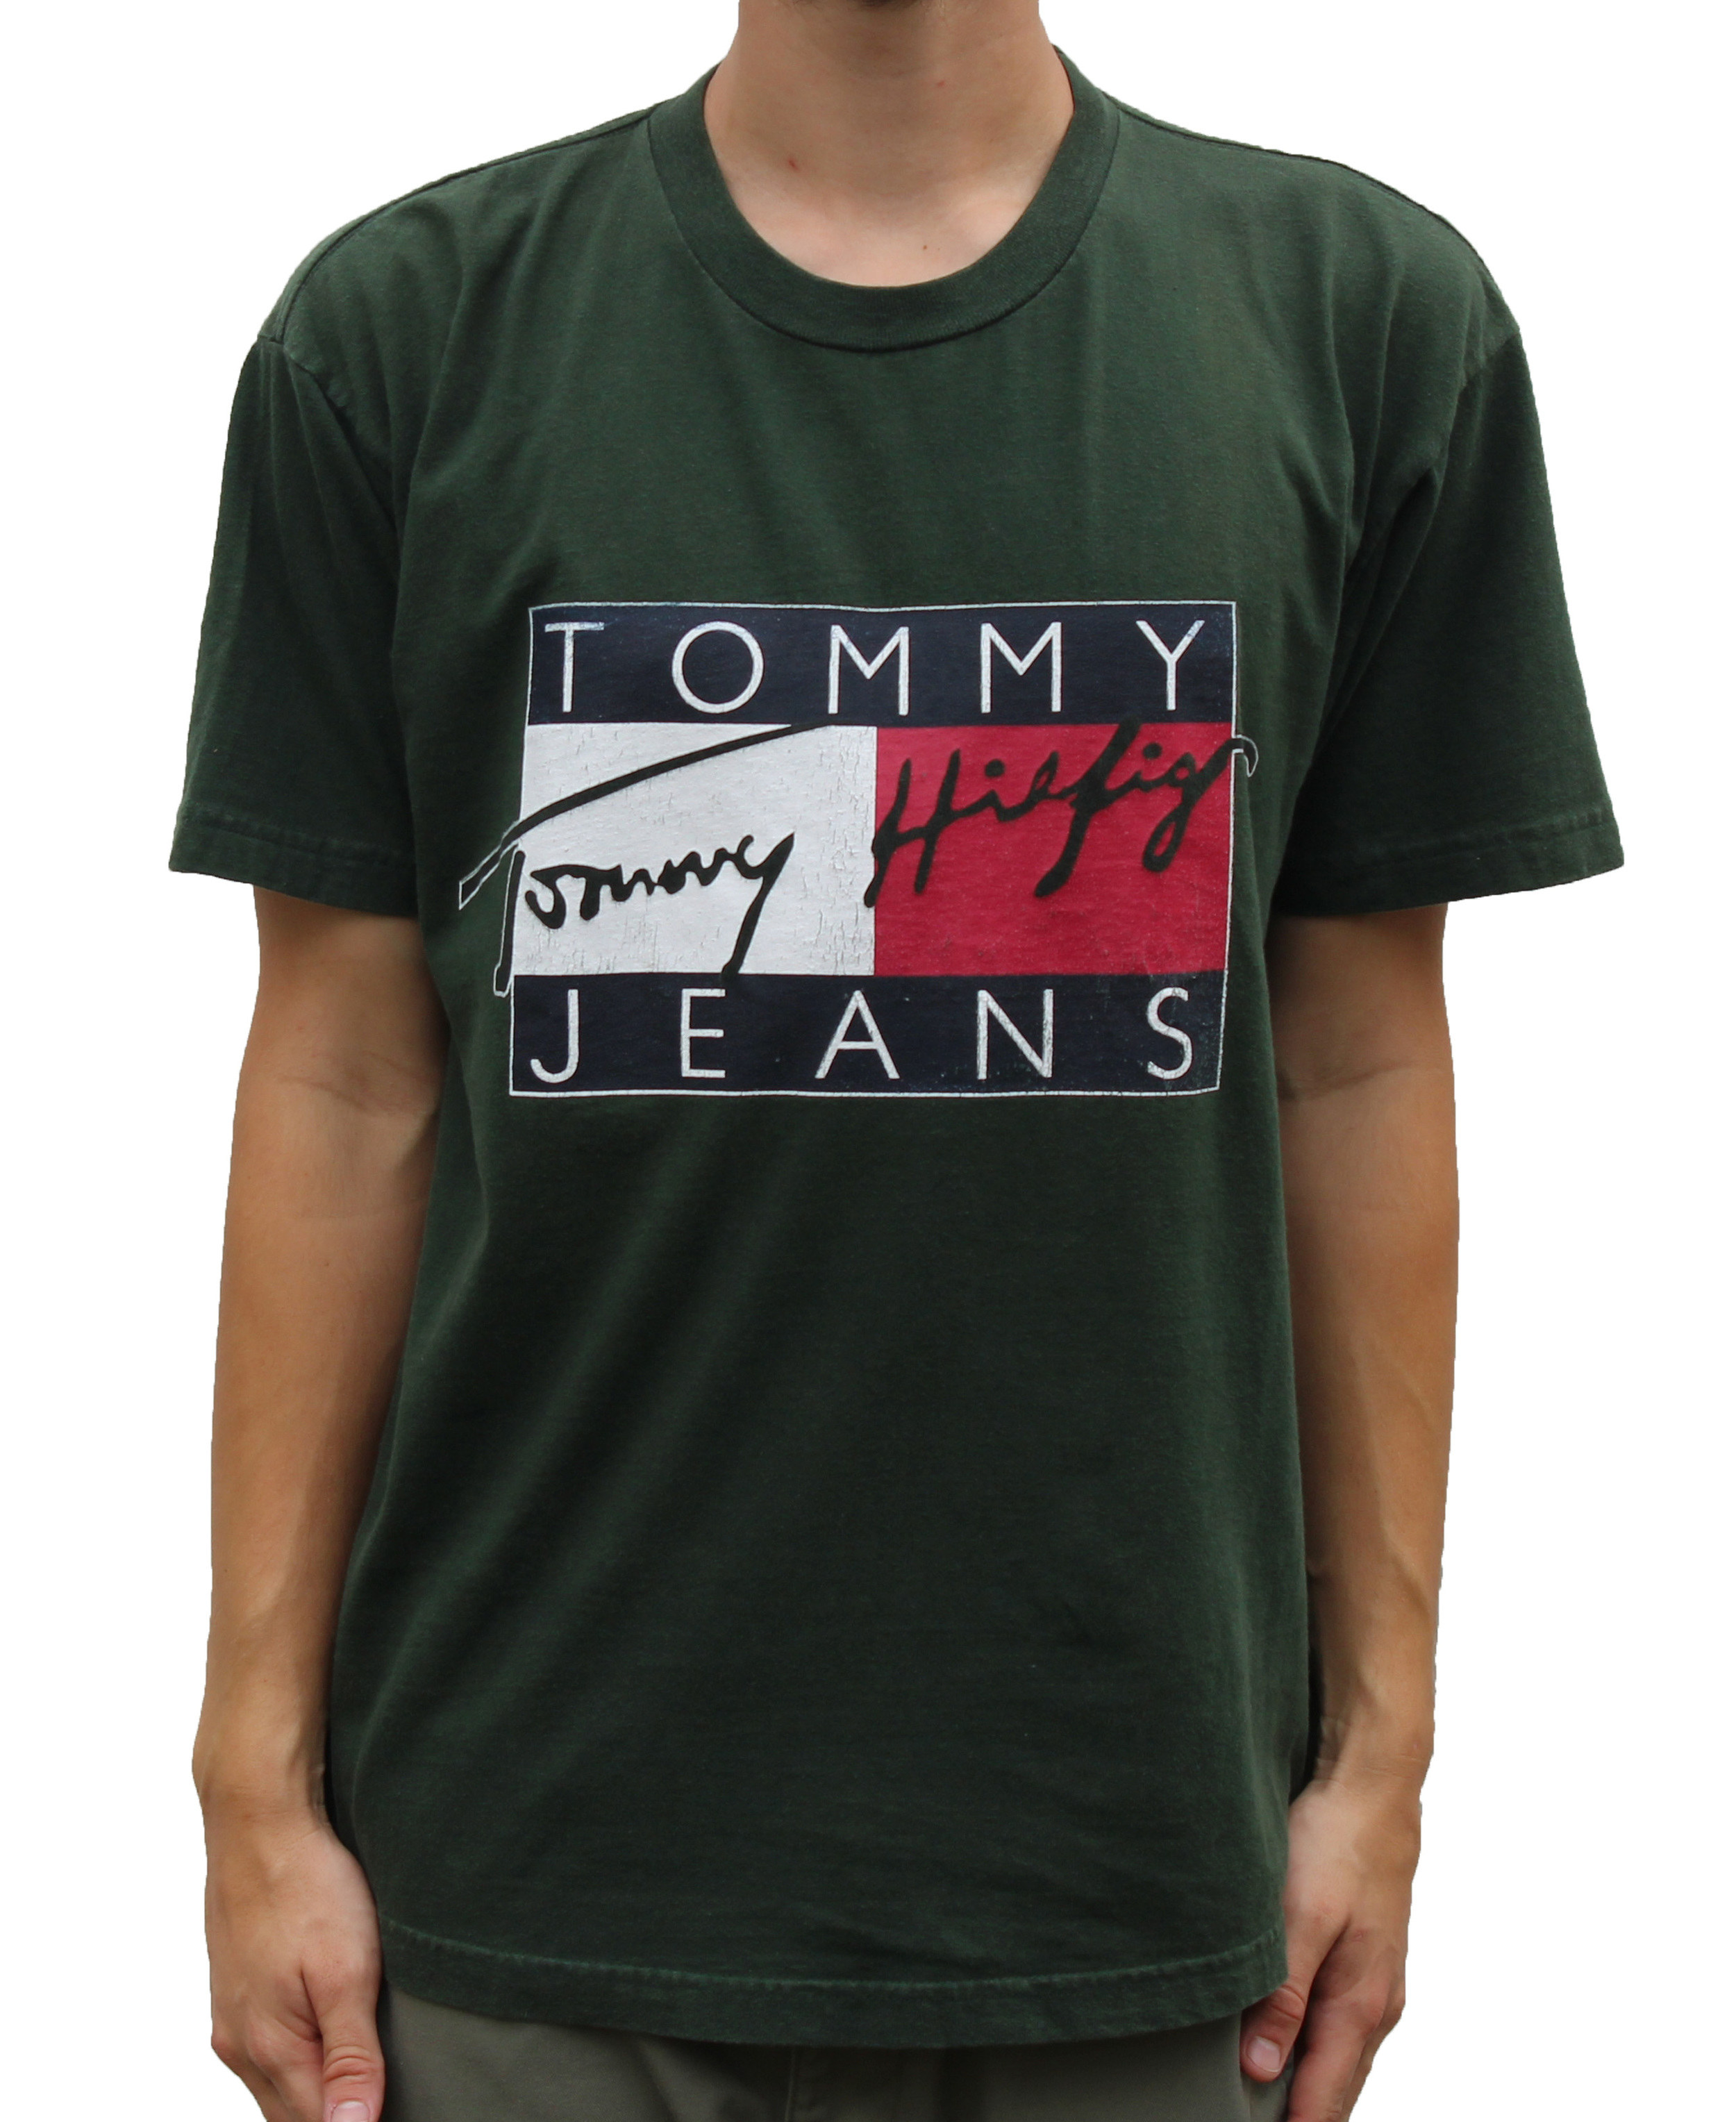 Tommy Jeans Signature Shirt Factory Sale, 52% OFF | www.emanagreen.com